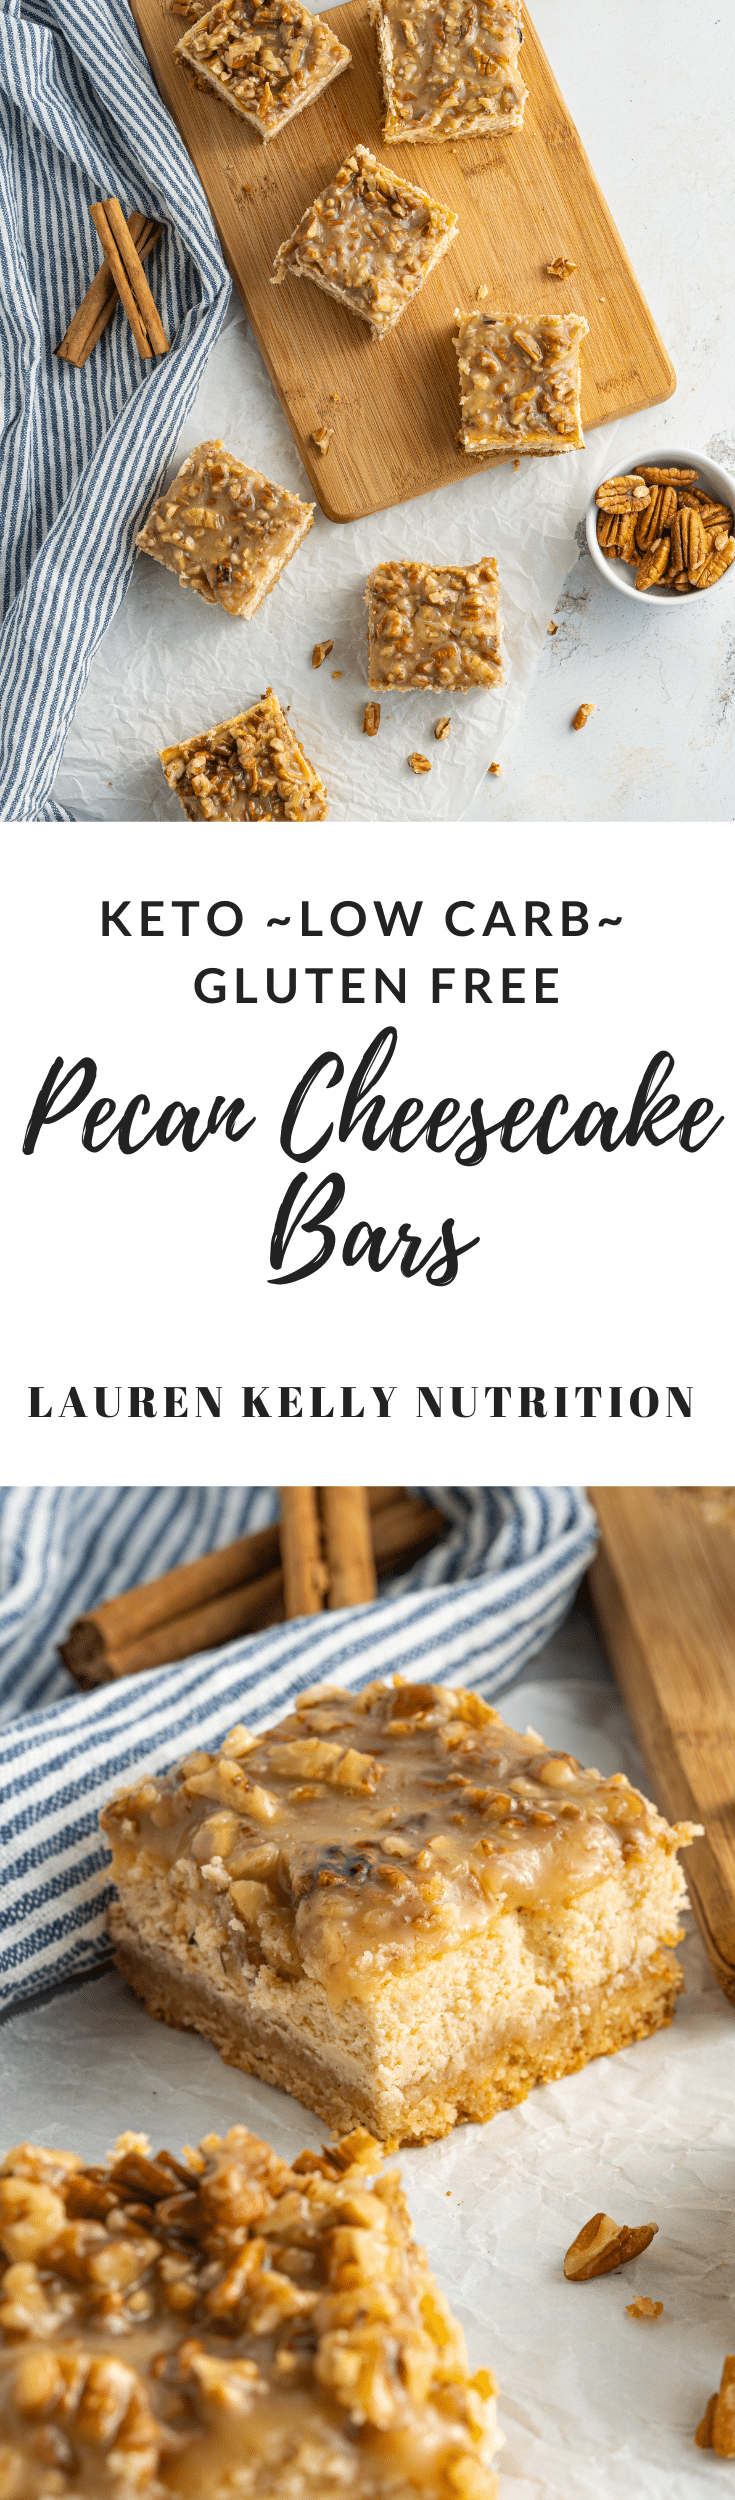 Delicious and easy to make Keto Pecan Cheesecake Bars!